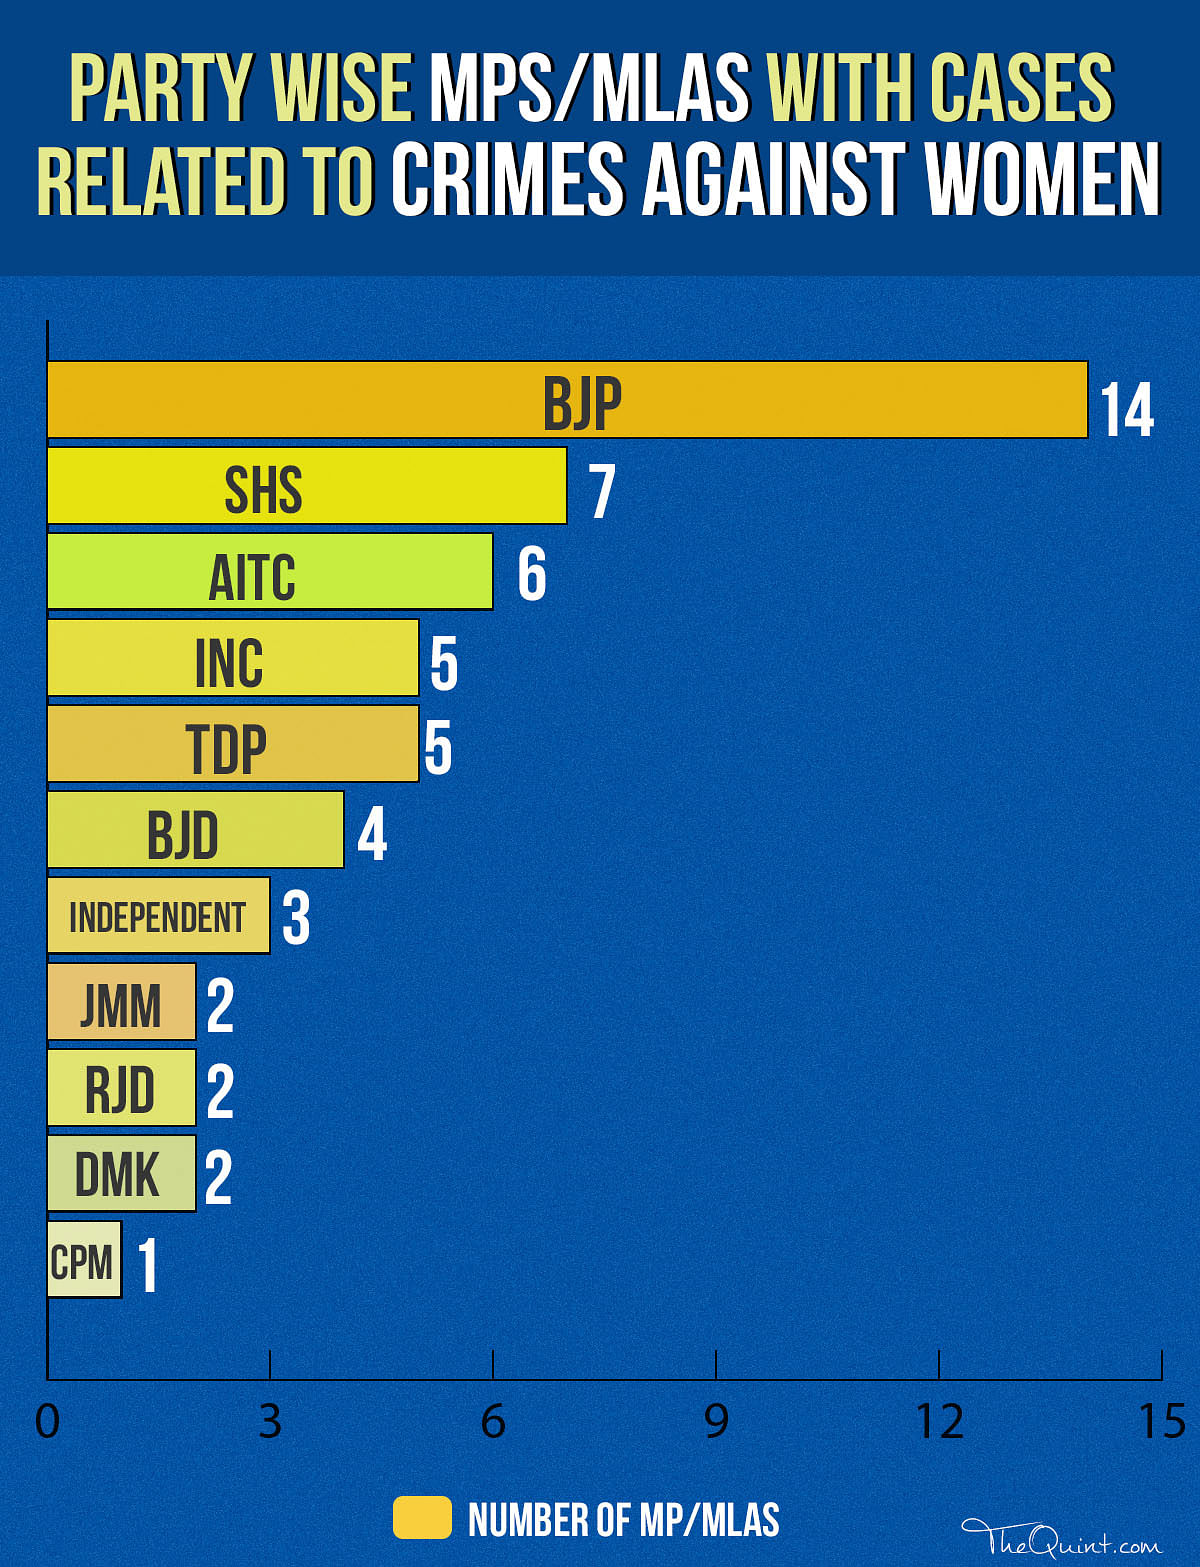 The BJP ranks the highest with 14 of its MPs and MLAs in the list, followed by the Sena (7) and the TMC (6).